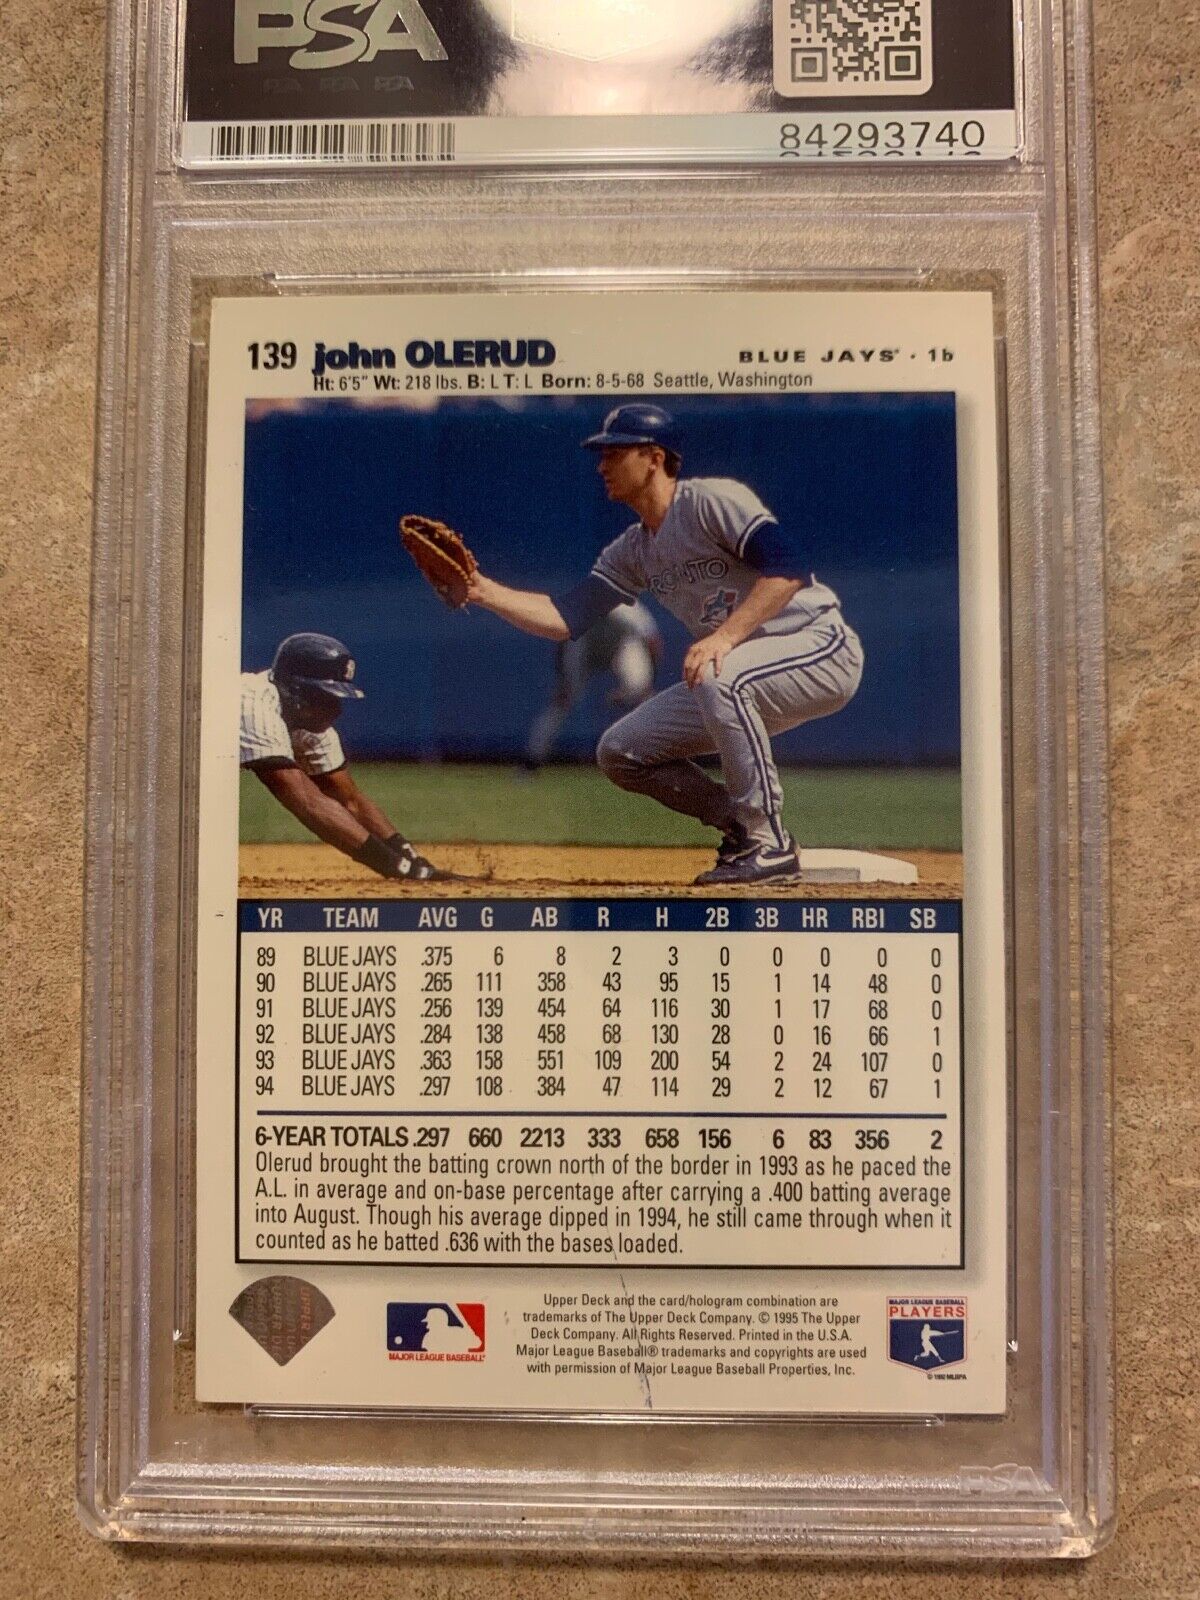 John Olerud Autographed 1995 Collector Choice Card 573 PSA Certified & Slabbed